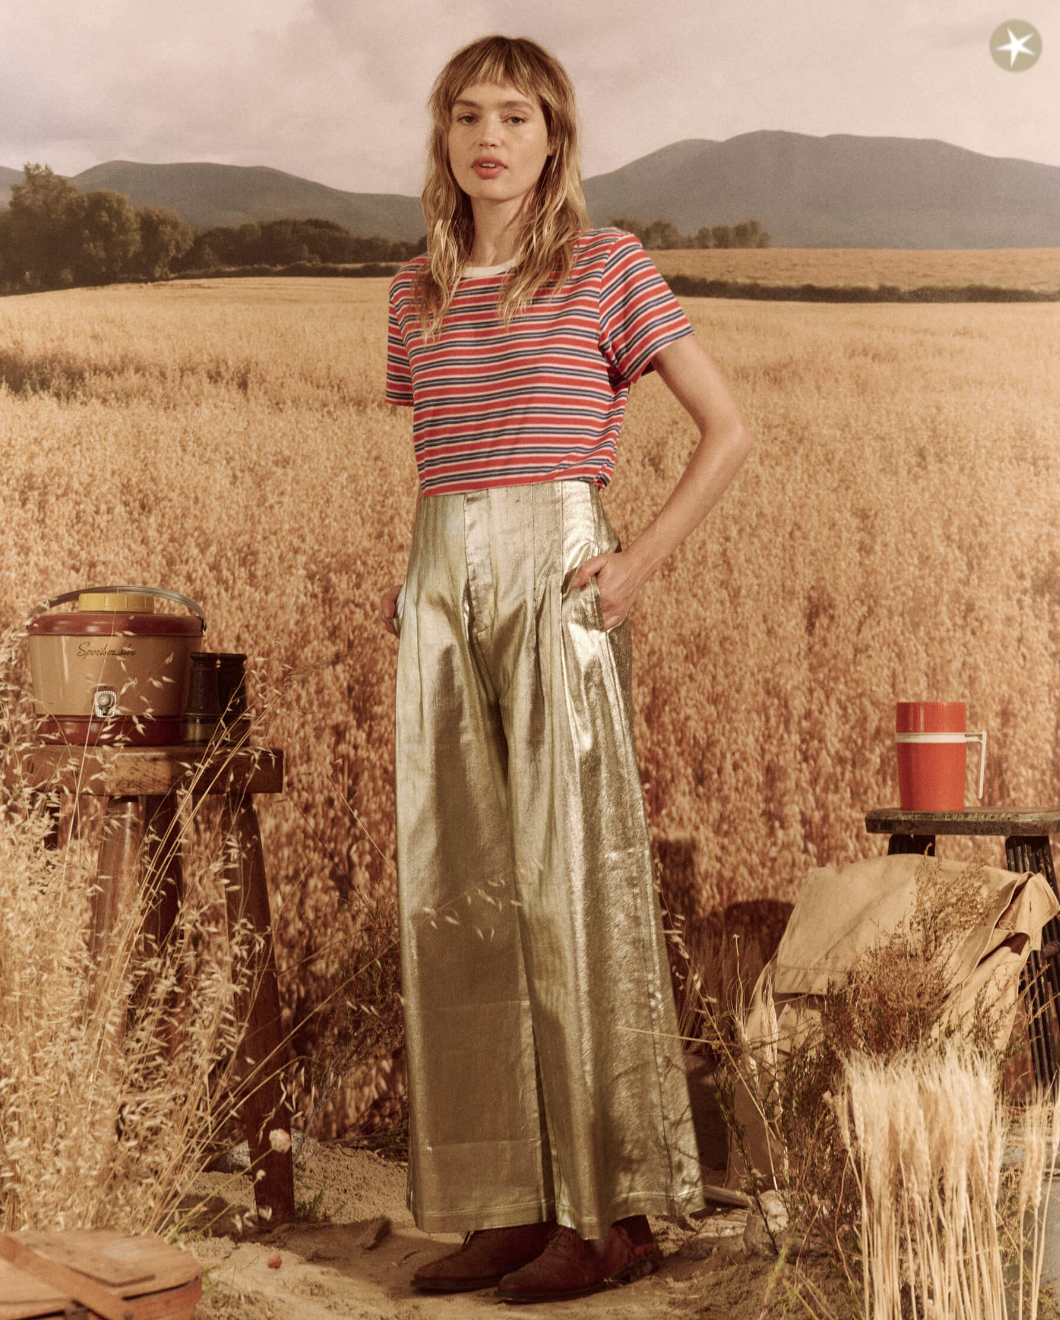 A woman stands in a wheat field wearing The Great Inc.'s Sculpted Trousers, a red and blue striped T-shirt, and brown shoes. A rustic barrel and can are visible in the background under a cloudy sky, adding to the Arizona-style ambiance.